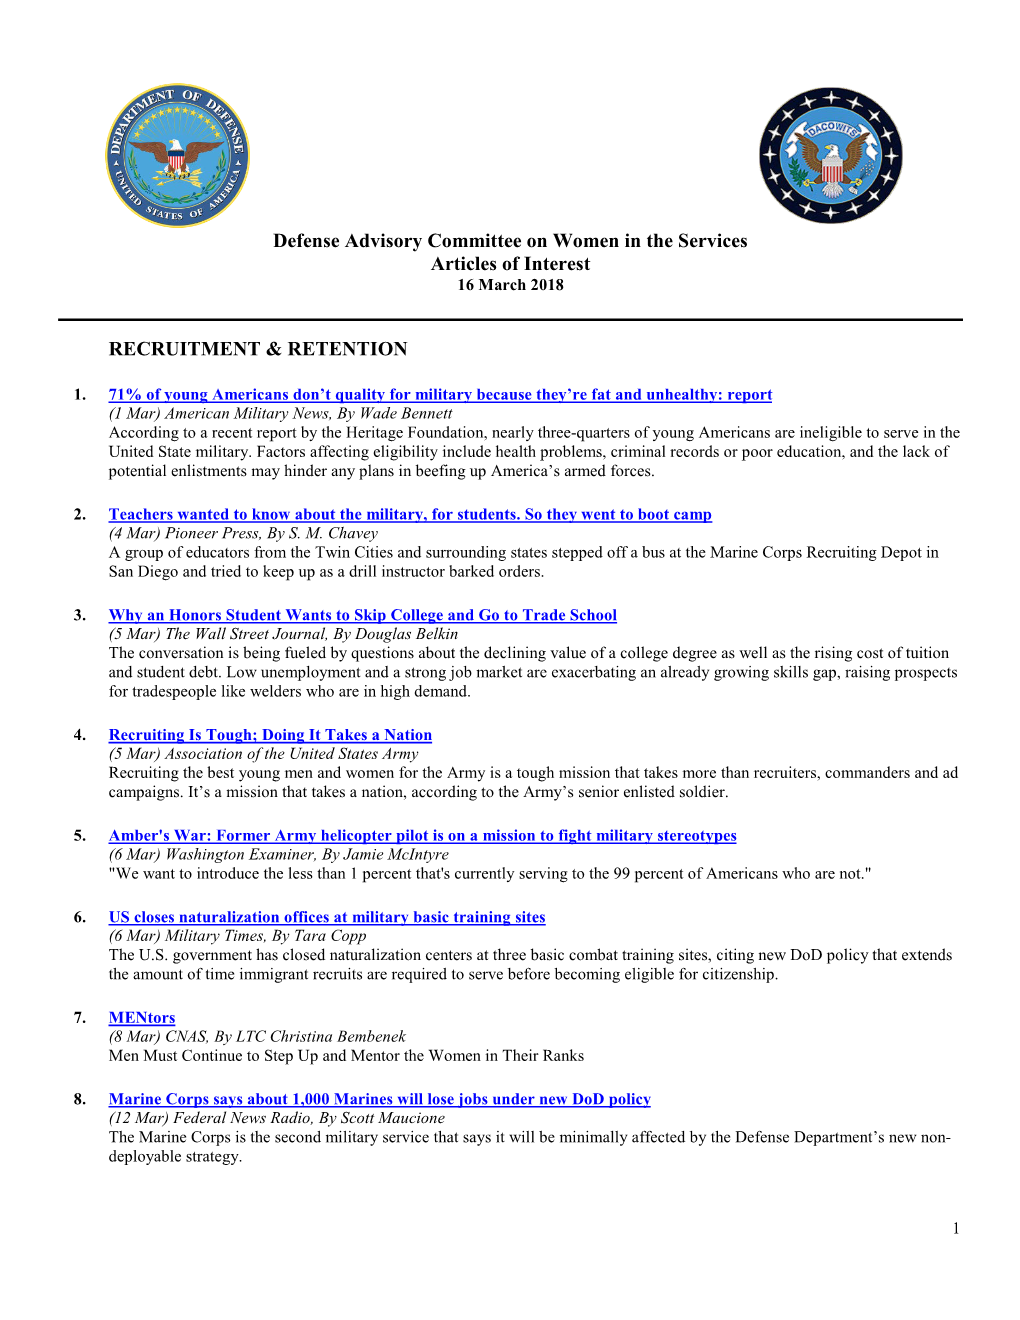 Defense Advisory Committee on Women in the Services Articles of Interest RECRUITMENT & RETENTION